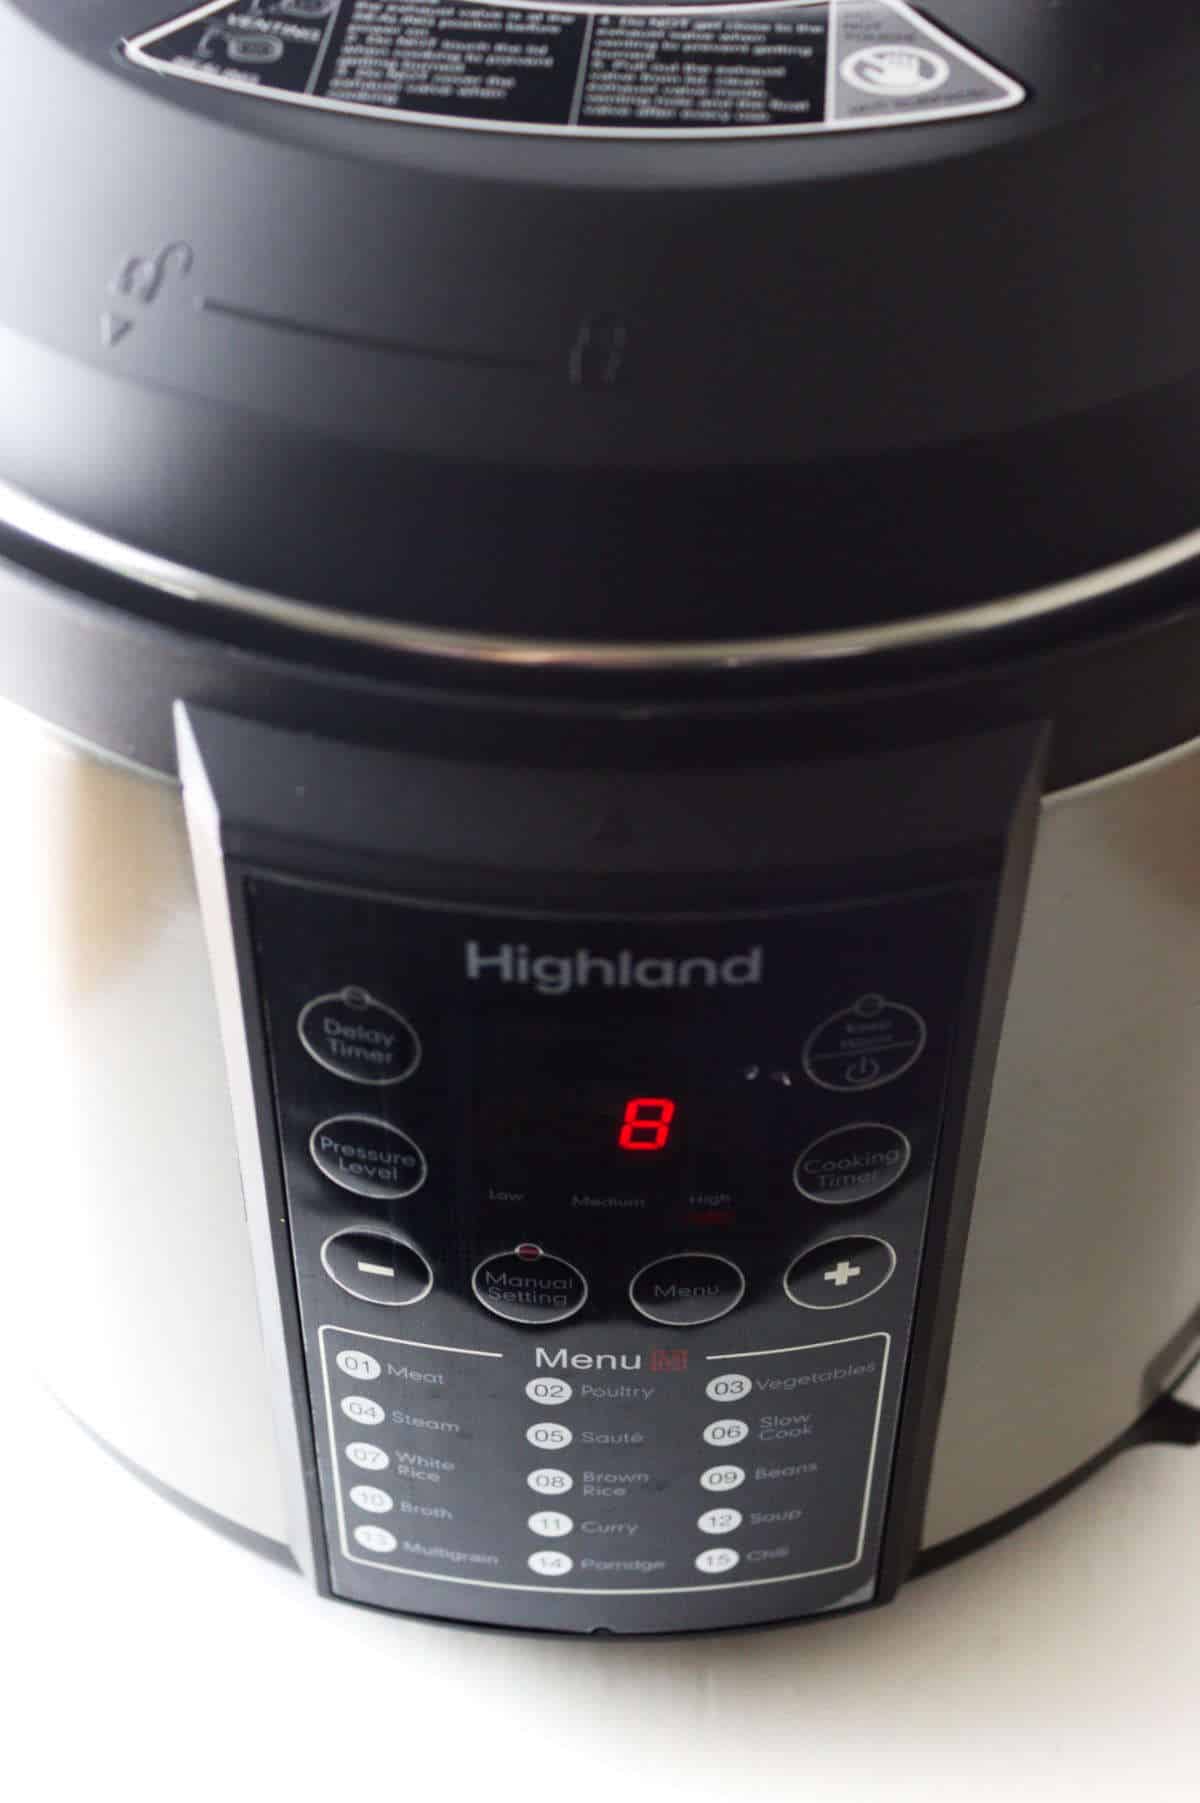 highland brand instant pot style electric pressure cooker.